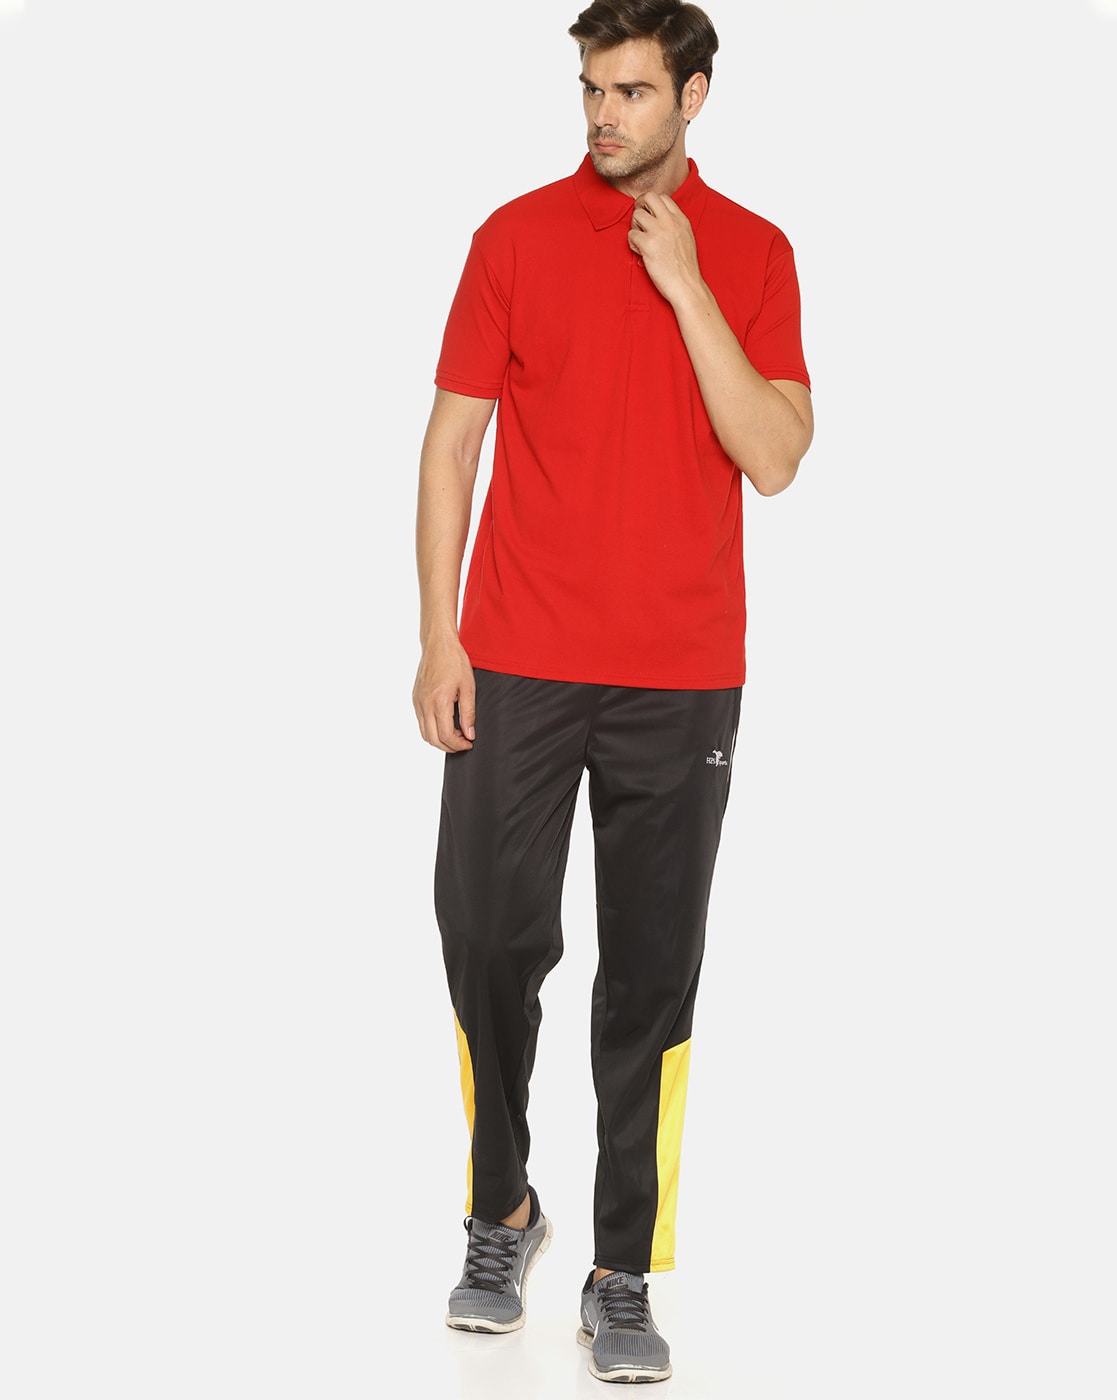 NNN TRACKPANTS AND TRACKSUITS Review NNN TRACKPANTS AND TRACKSUITS Shirt  Trouser Menswear Womenswear India Quality NNN sport  recommend brand   Cheap and best  mouthshutcom